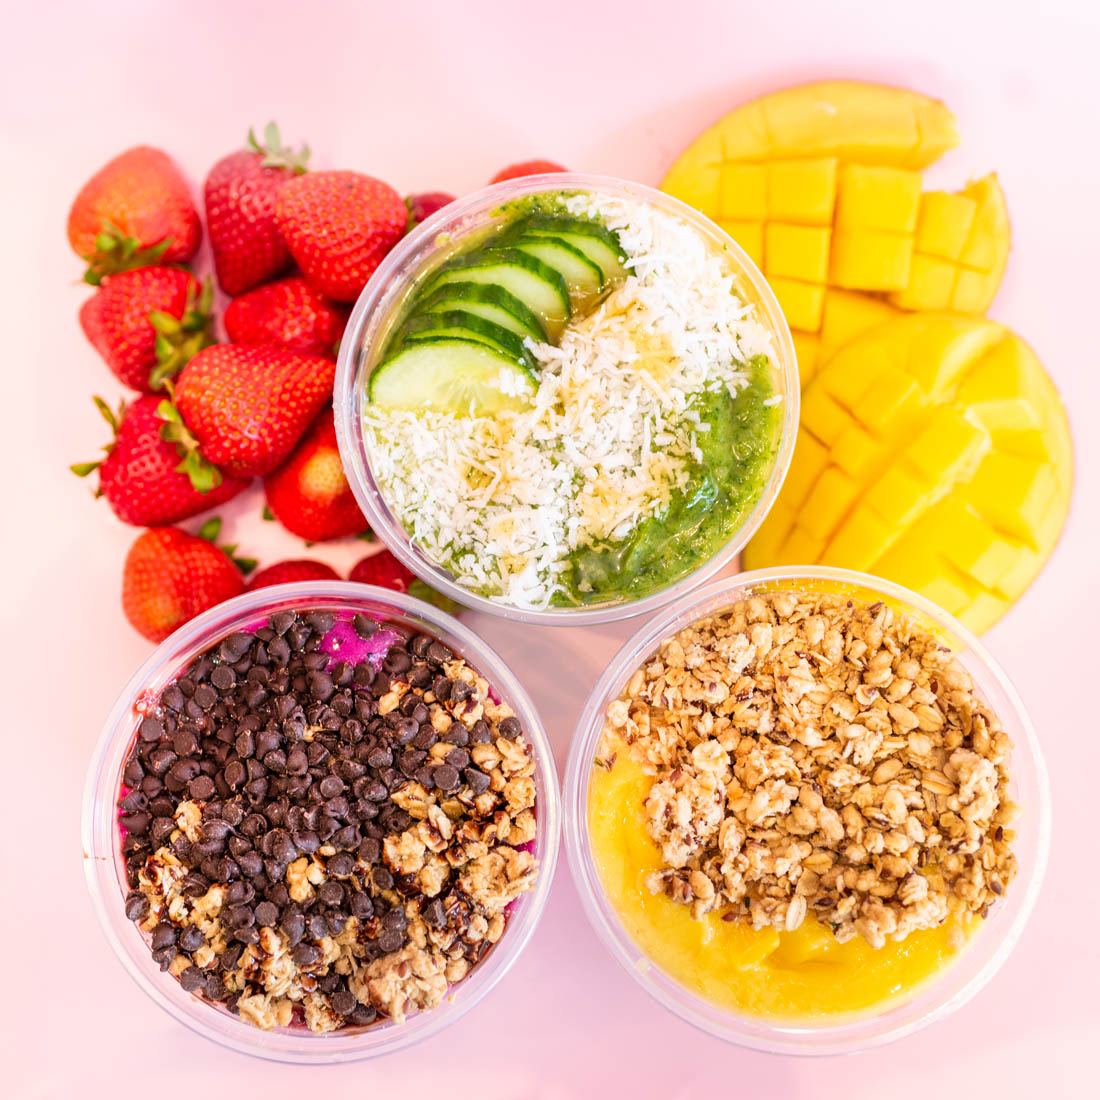 Rush Bowls smoothie bowls nutrition info in New Orleans, LA.